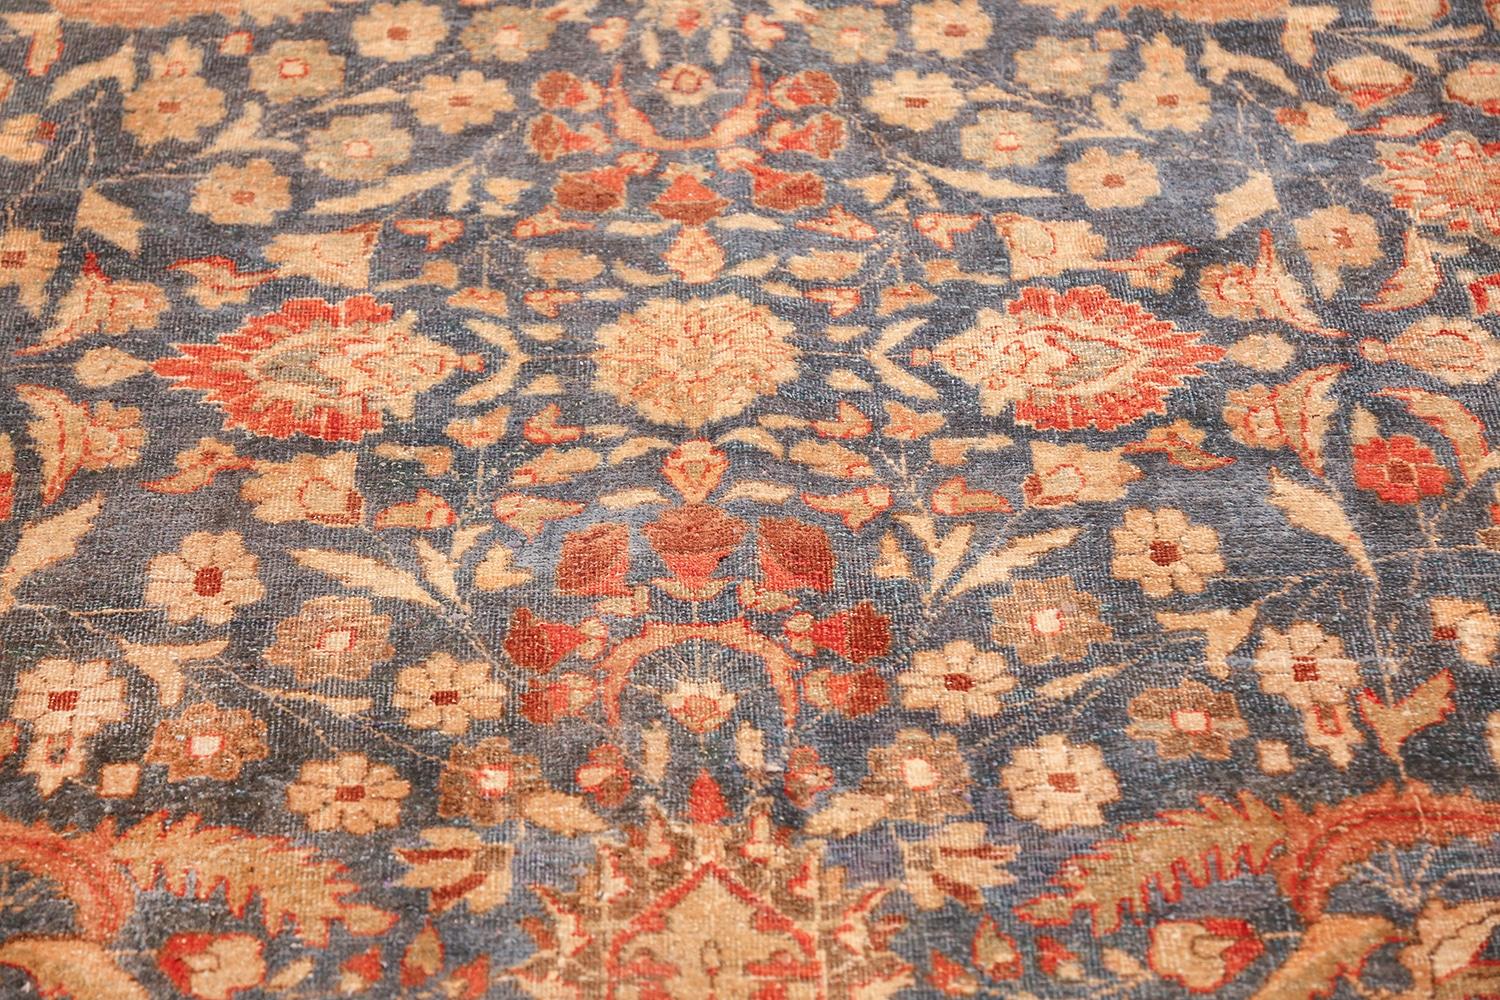 20th Century Breathtaking Antique Room Size Blue and Rust Persian Khorassan Rug 10' x 14'6